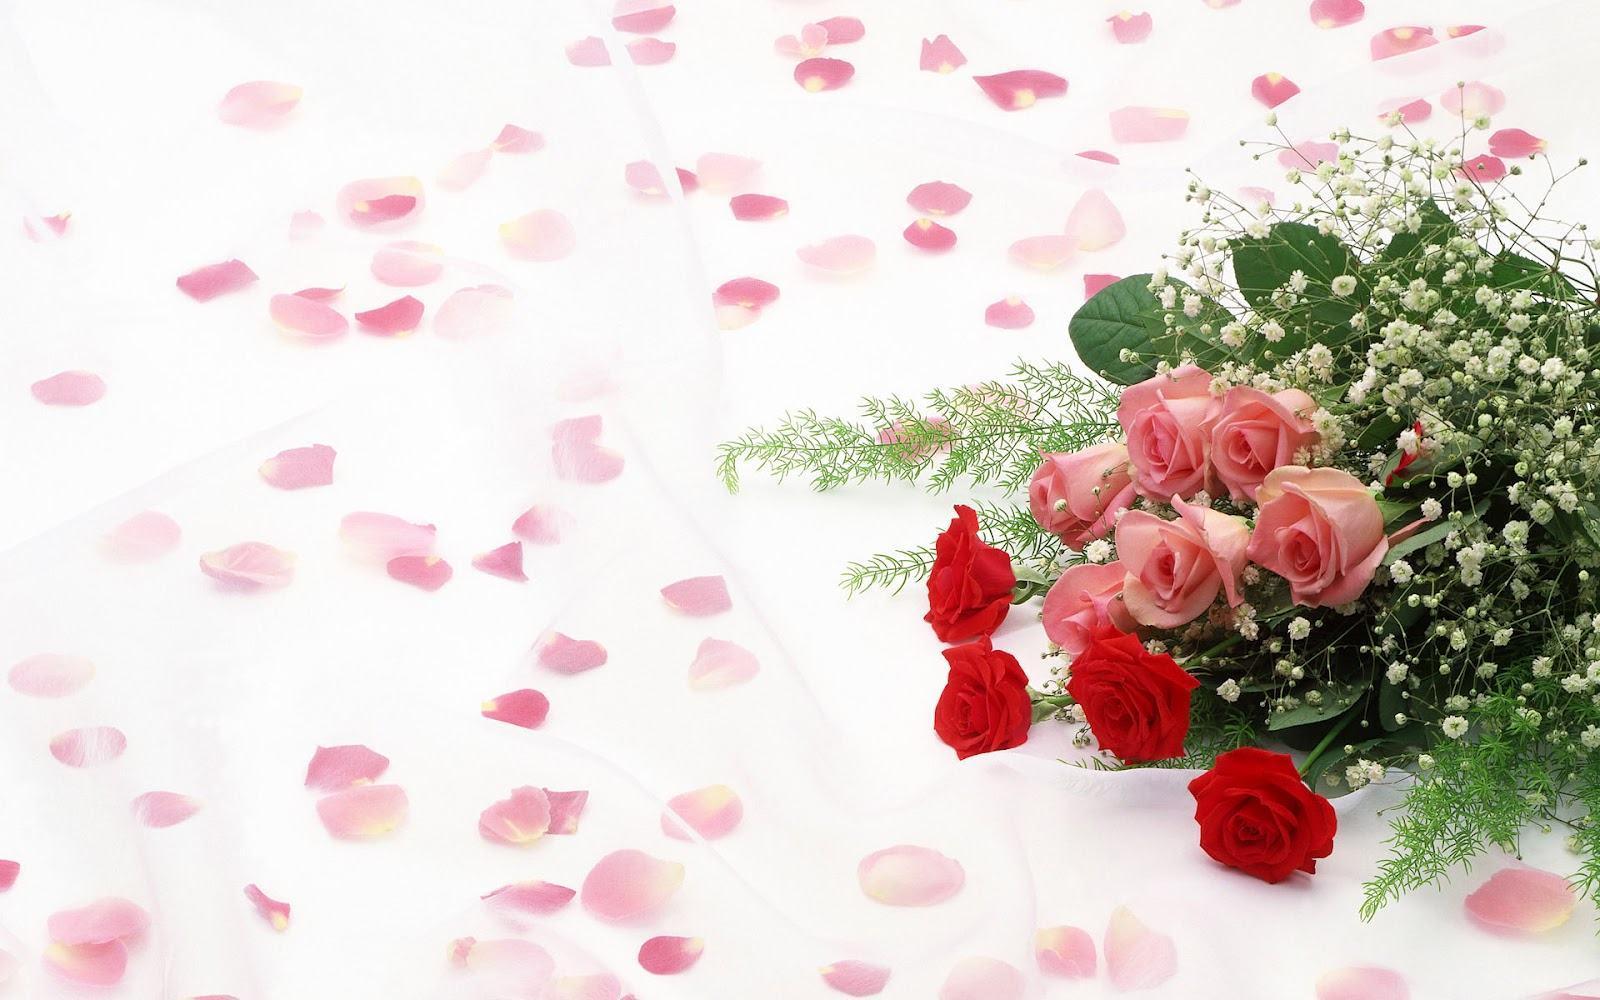 Red Roses With White Backgrounds